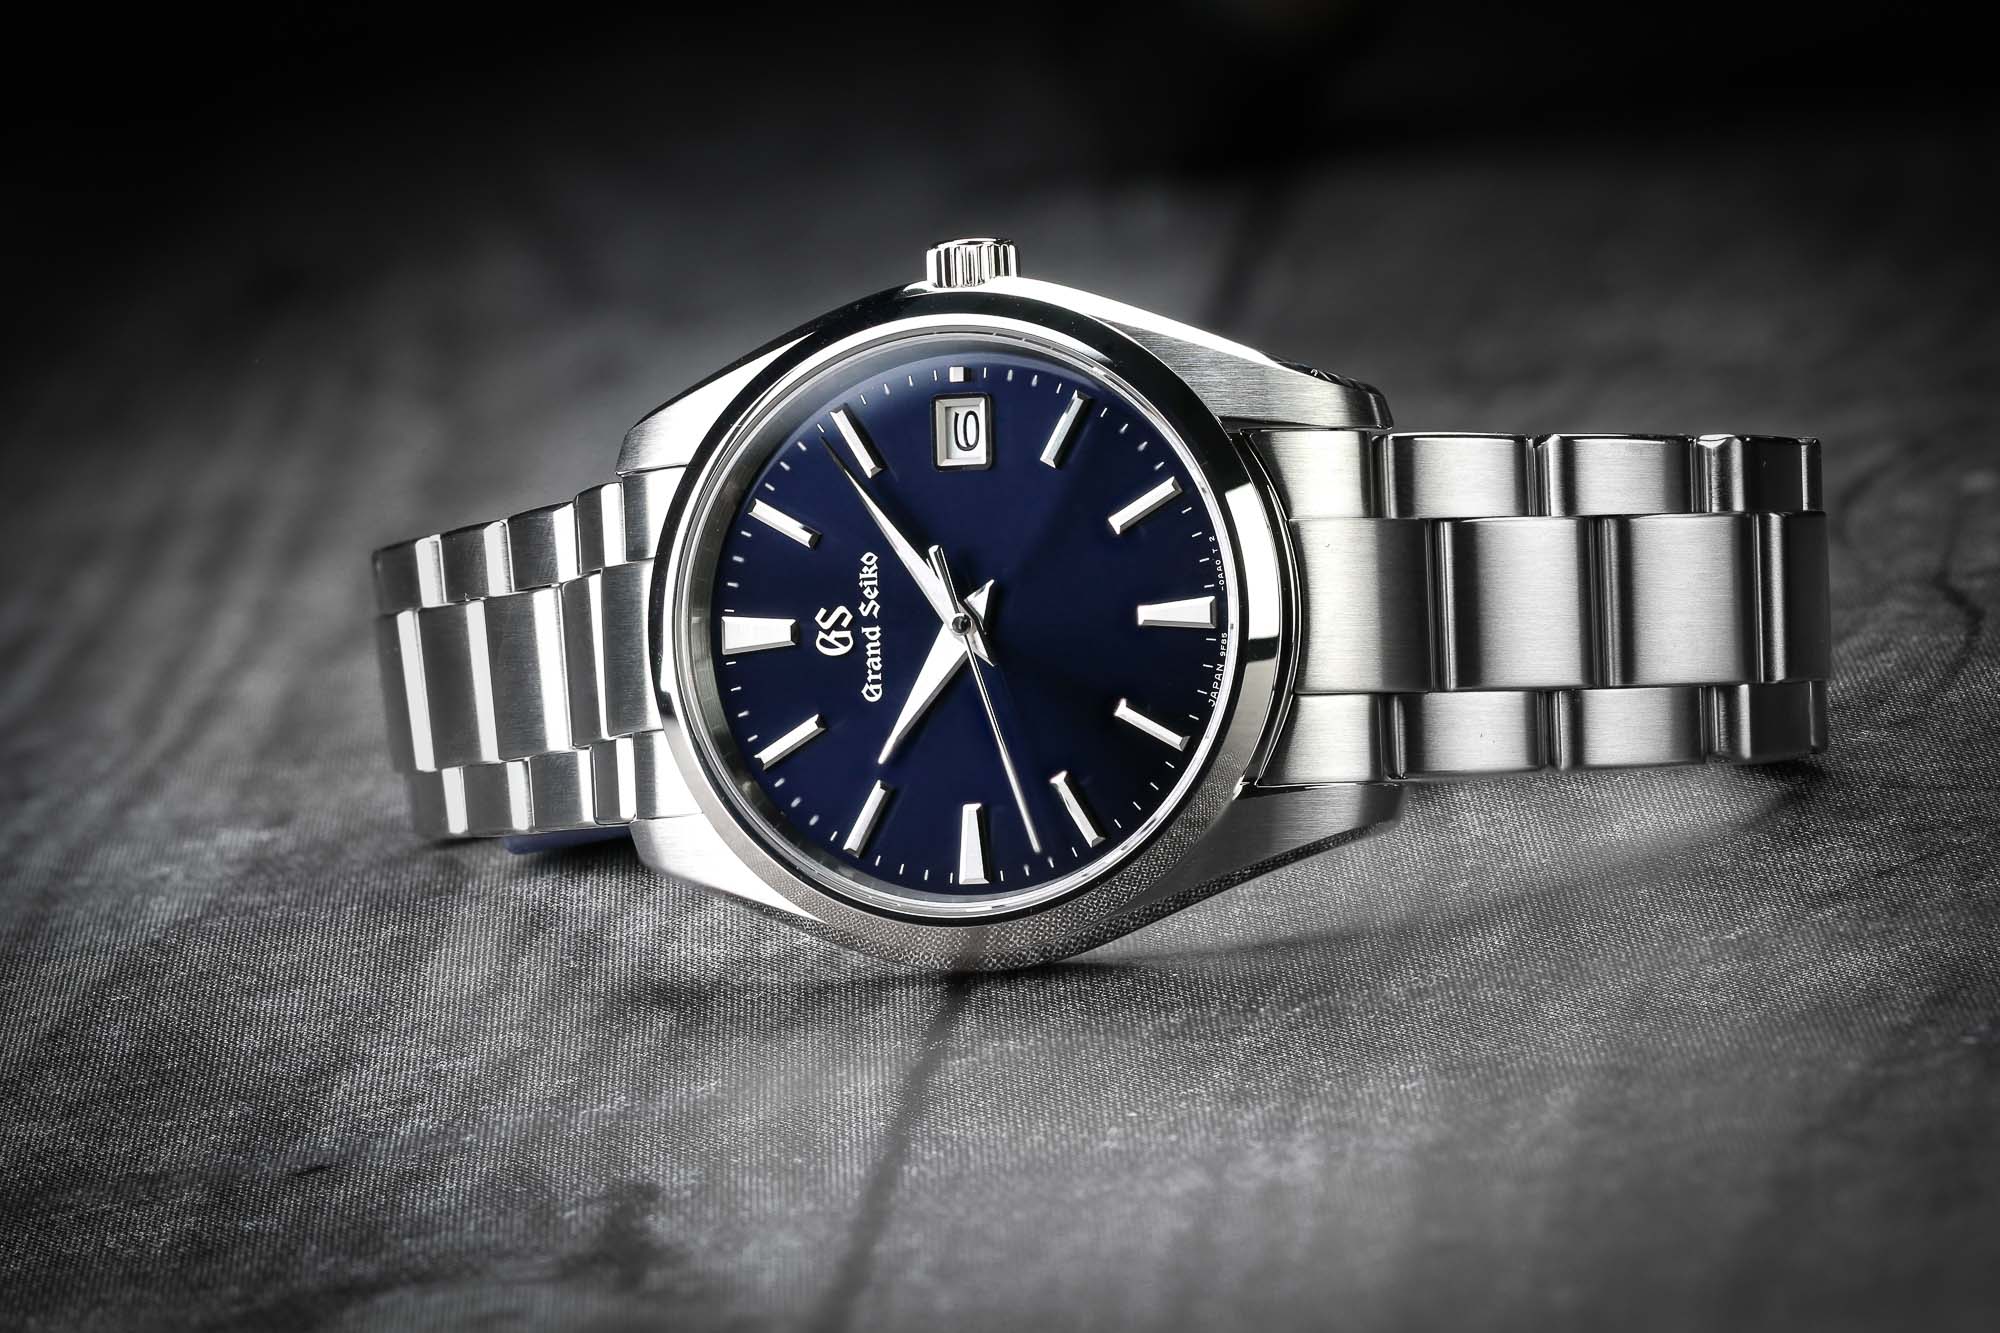 Grand Seiko SBGP013 stainless steel wristwatch with blue dial.